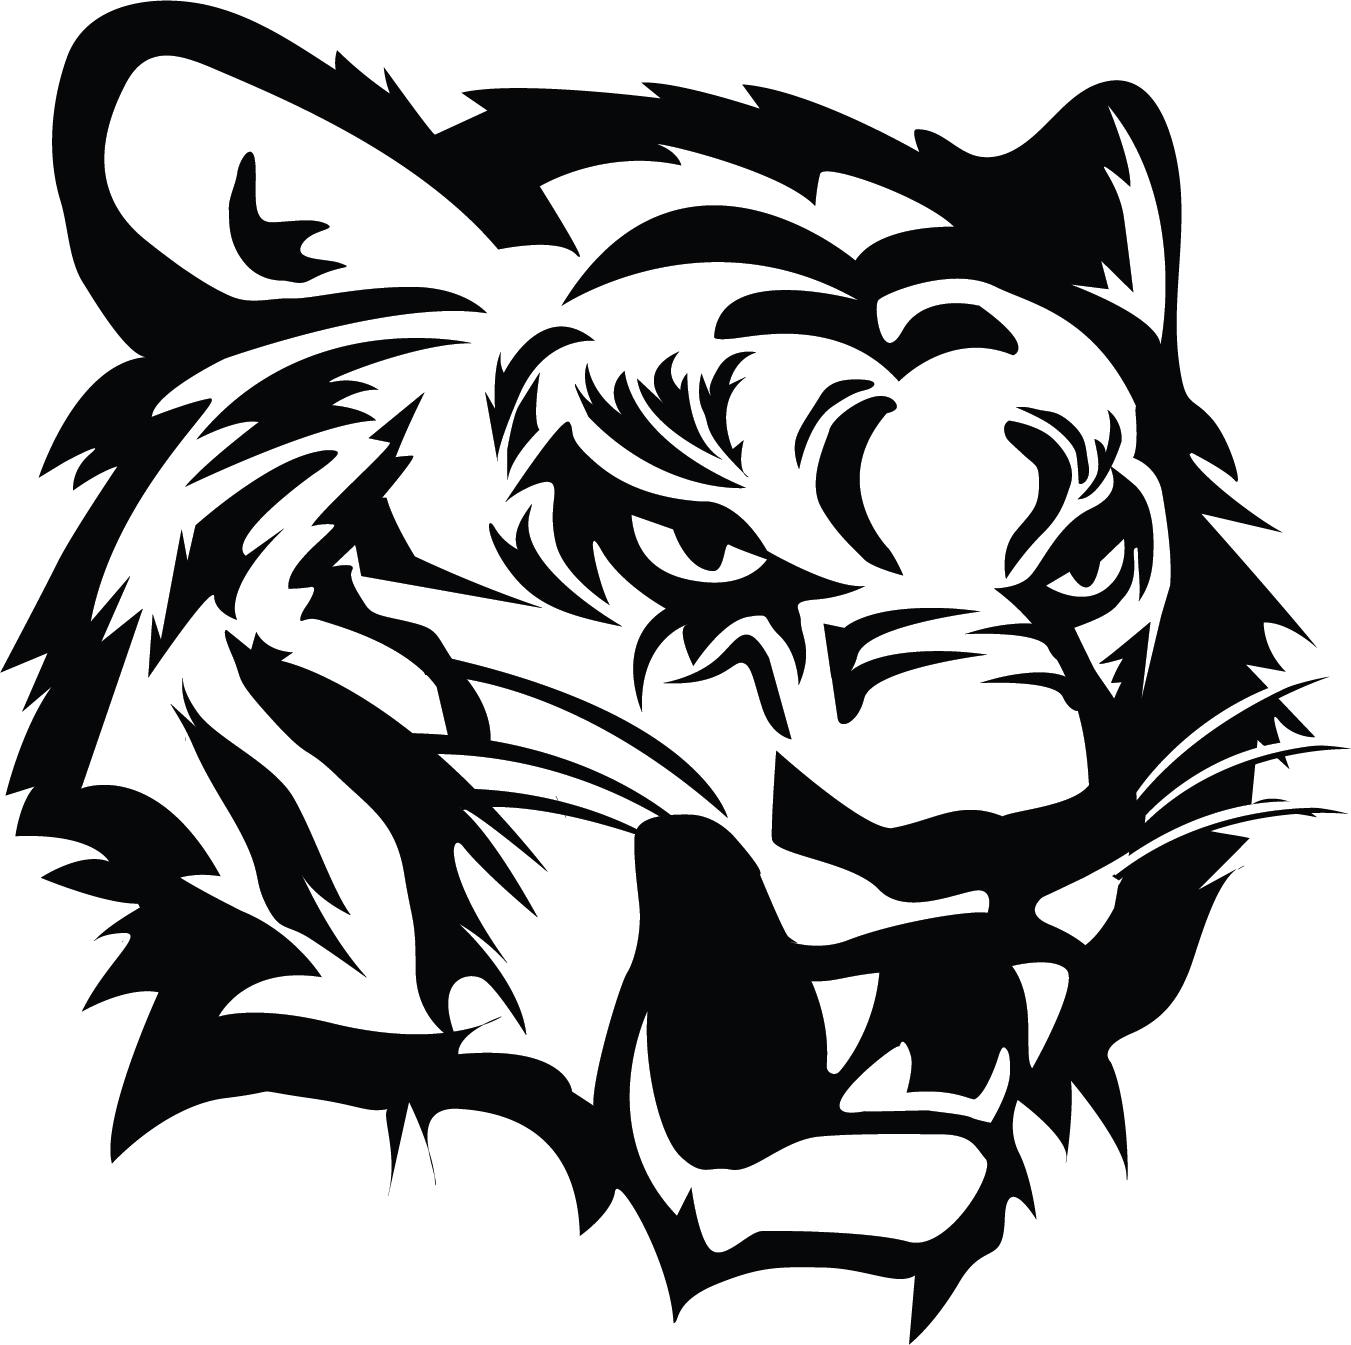 Tiger Head Graphic in Black and White